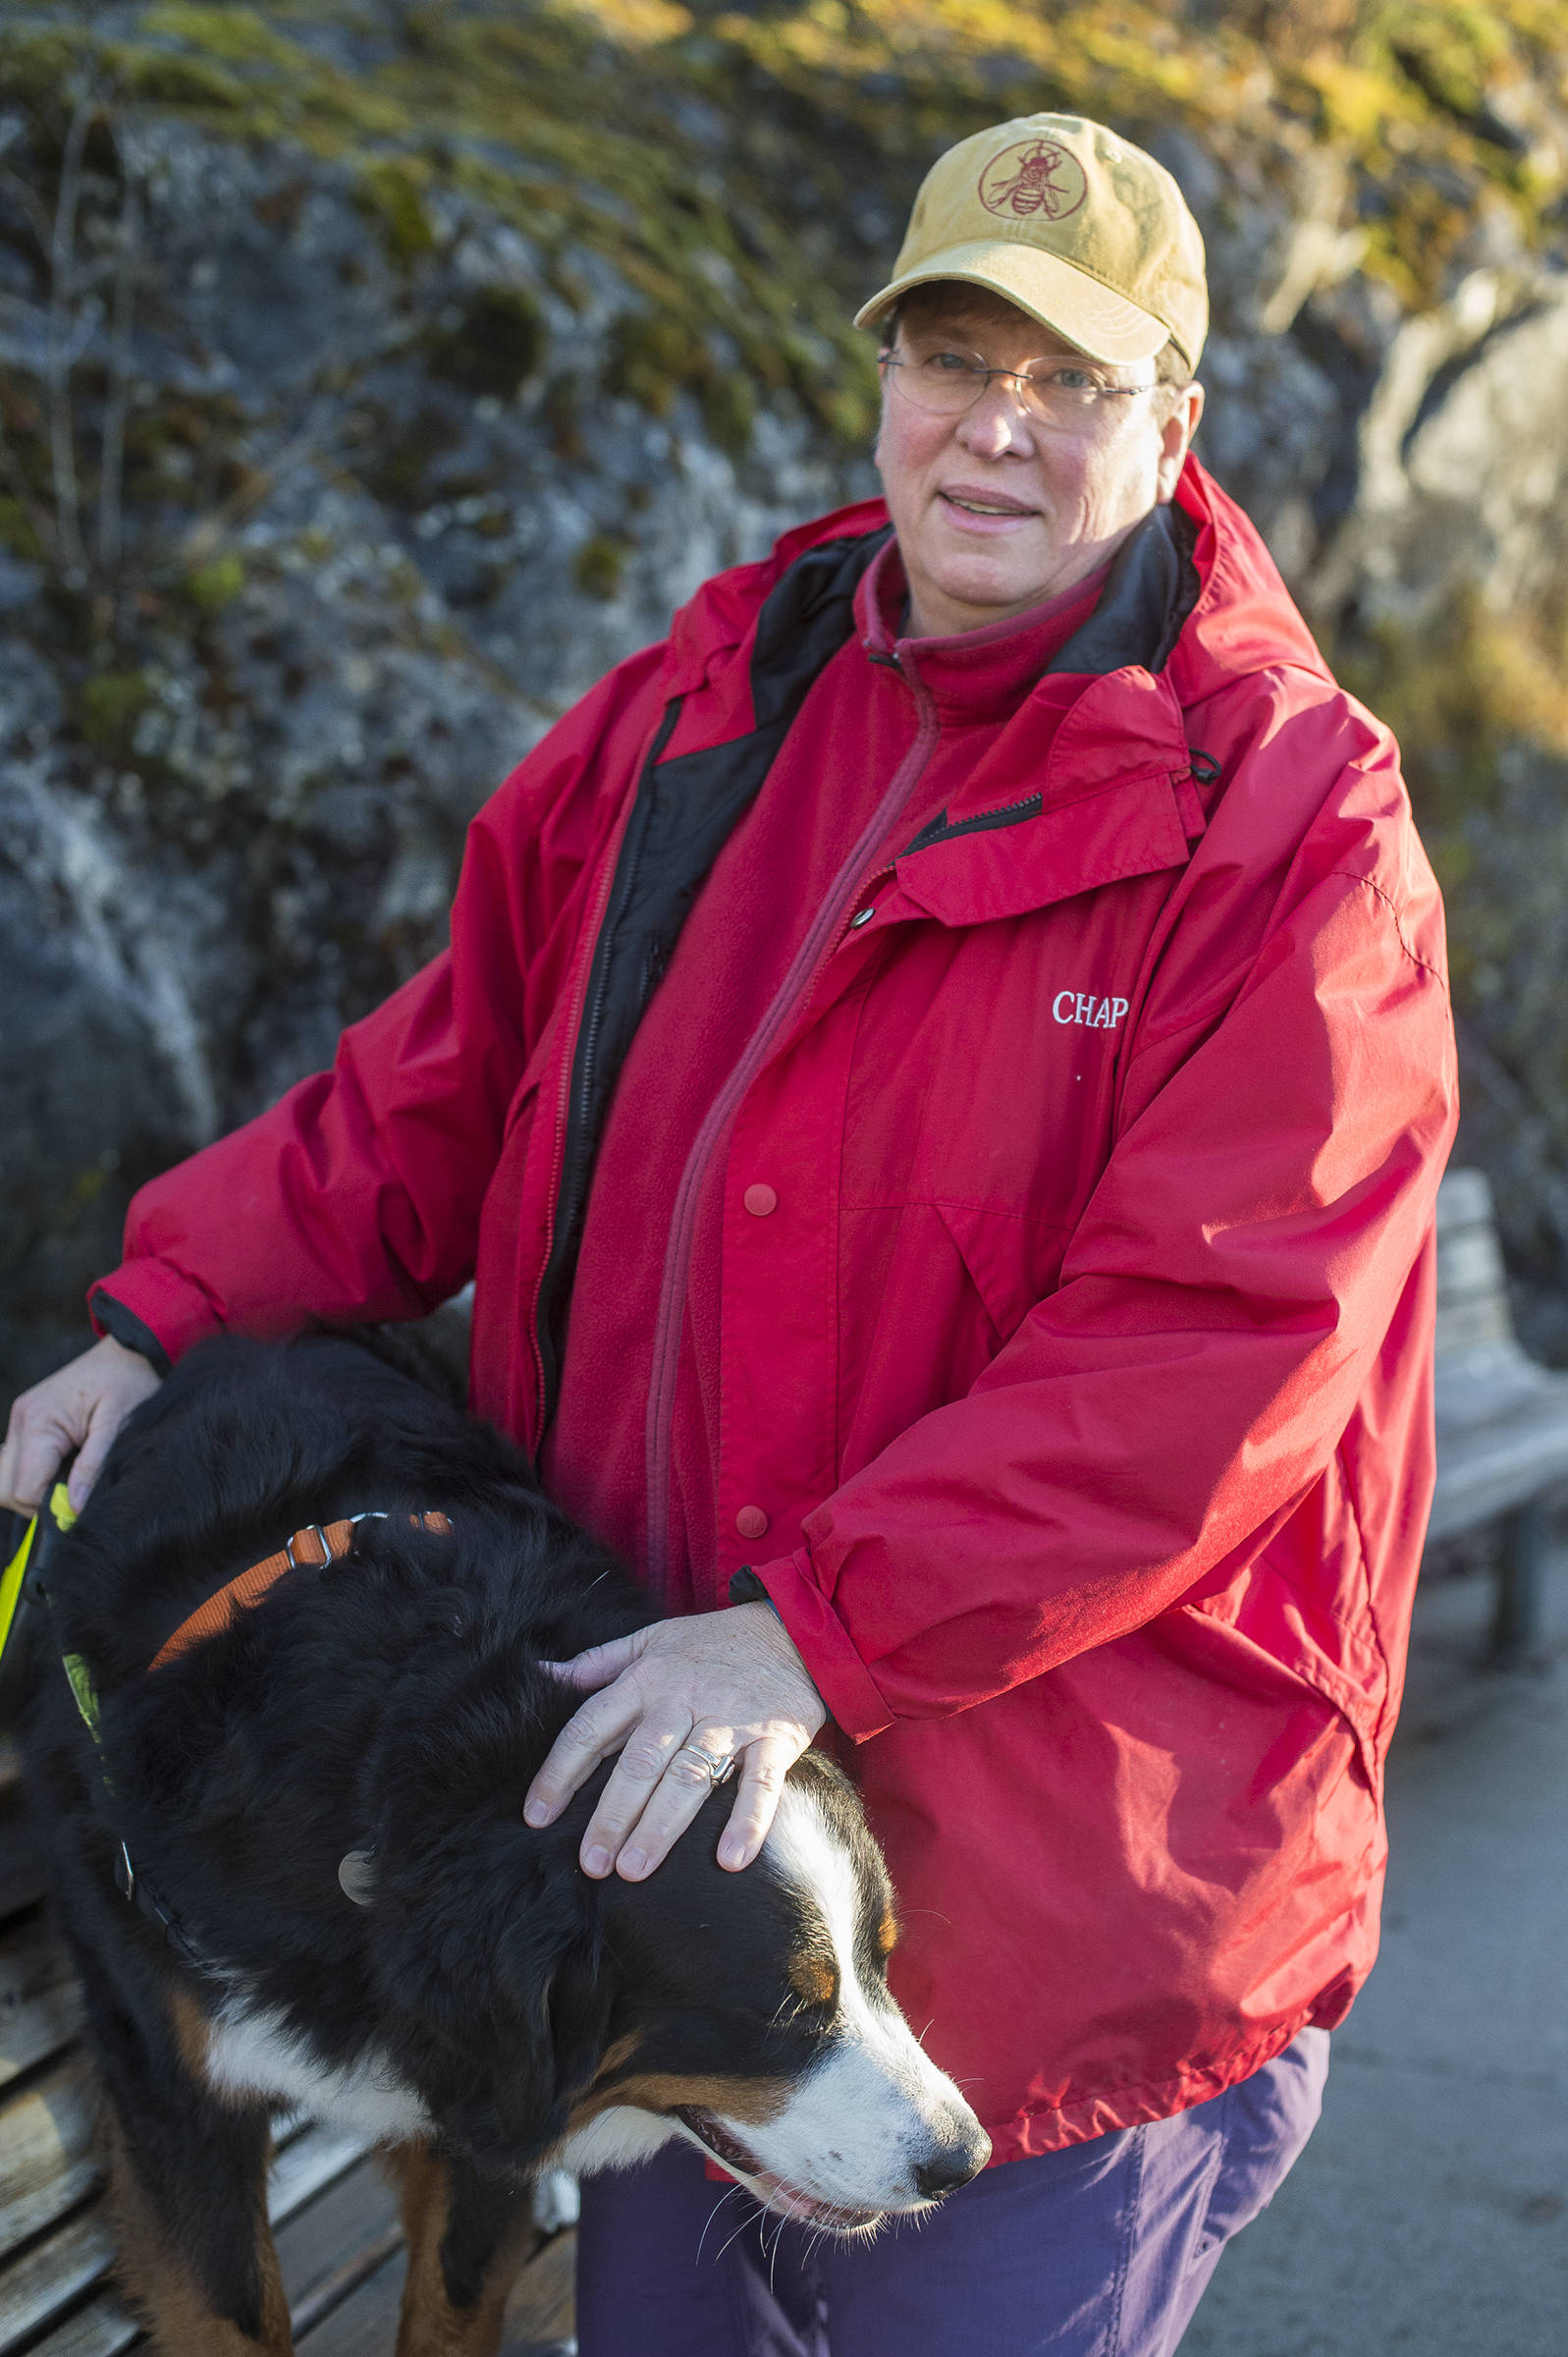 The Rev. Karen Dammann, of Aldersgate United Methodist Church, stops for a picture during a walk with her dog, Pepper, at the Mendenhall Glacier Visitor Center on Wednesday, Nov. 21, 2018. Dammann, who is an openly gay pastor, invites the community to the longtime, inclusive Thanksgiving celebration at Eagle River United Methodist Camp. (Michael Penn | Juneau Empire)